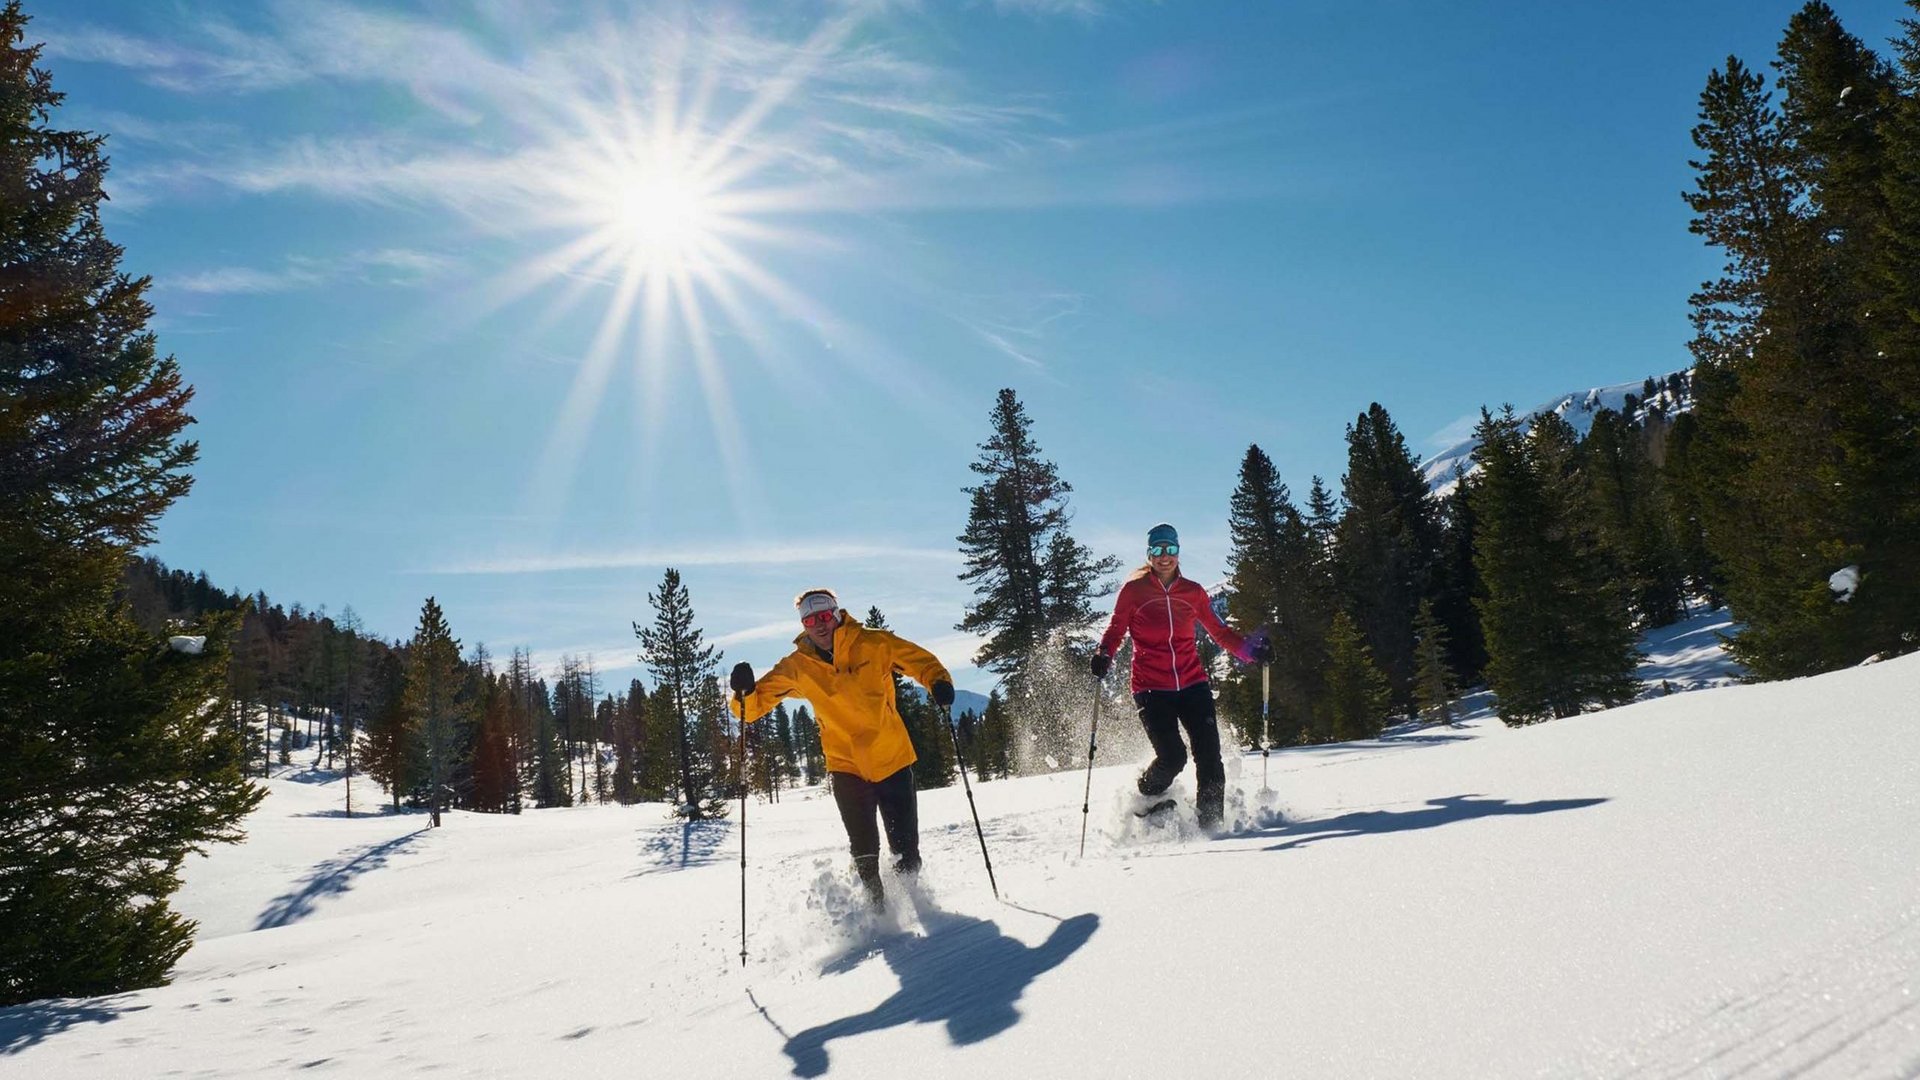 From cattle drives to snow-shoe hikes: Lungau